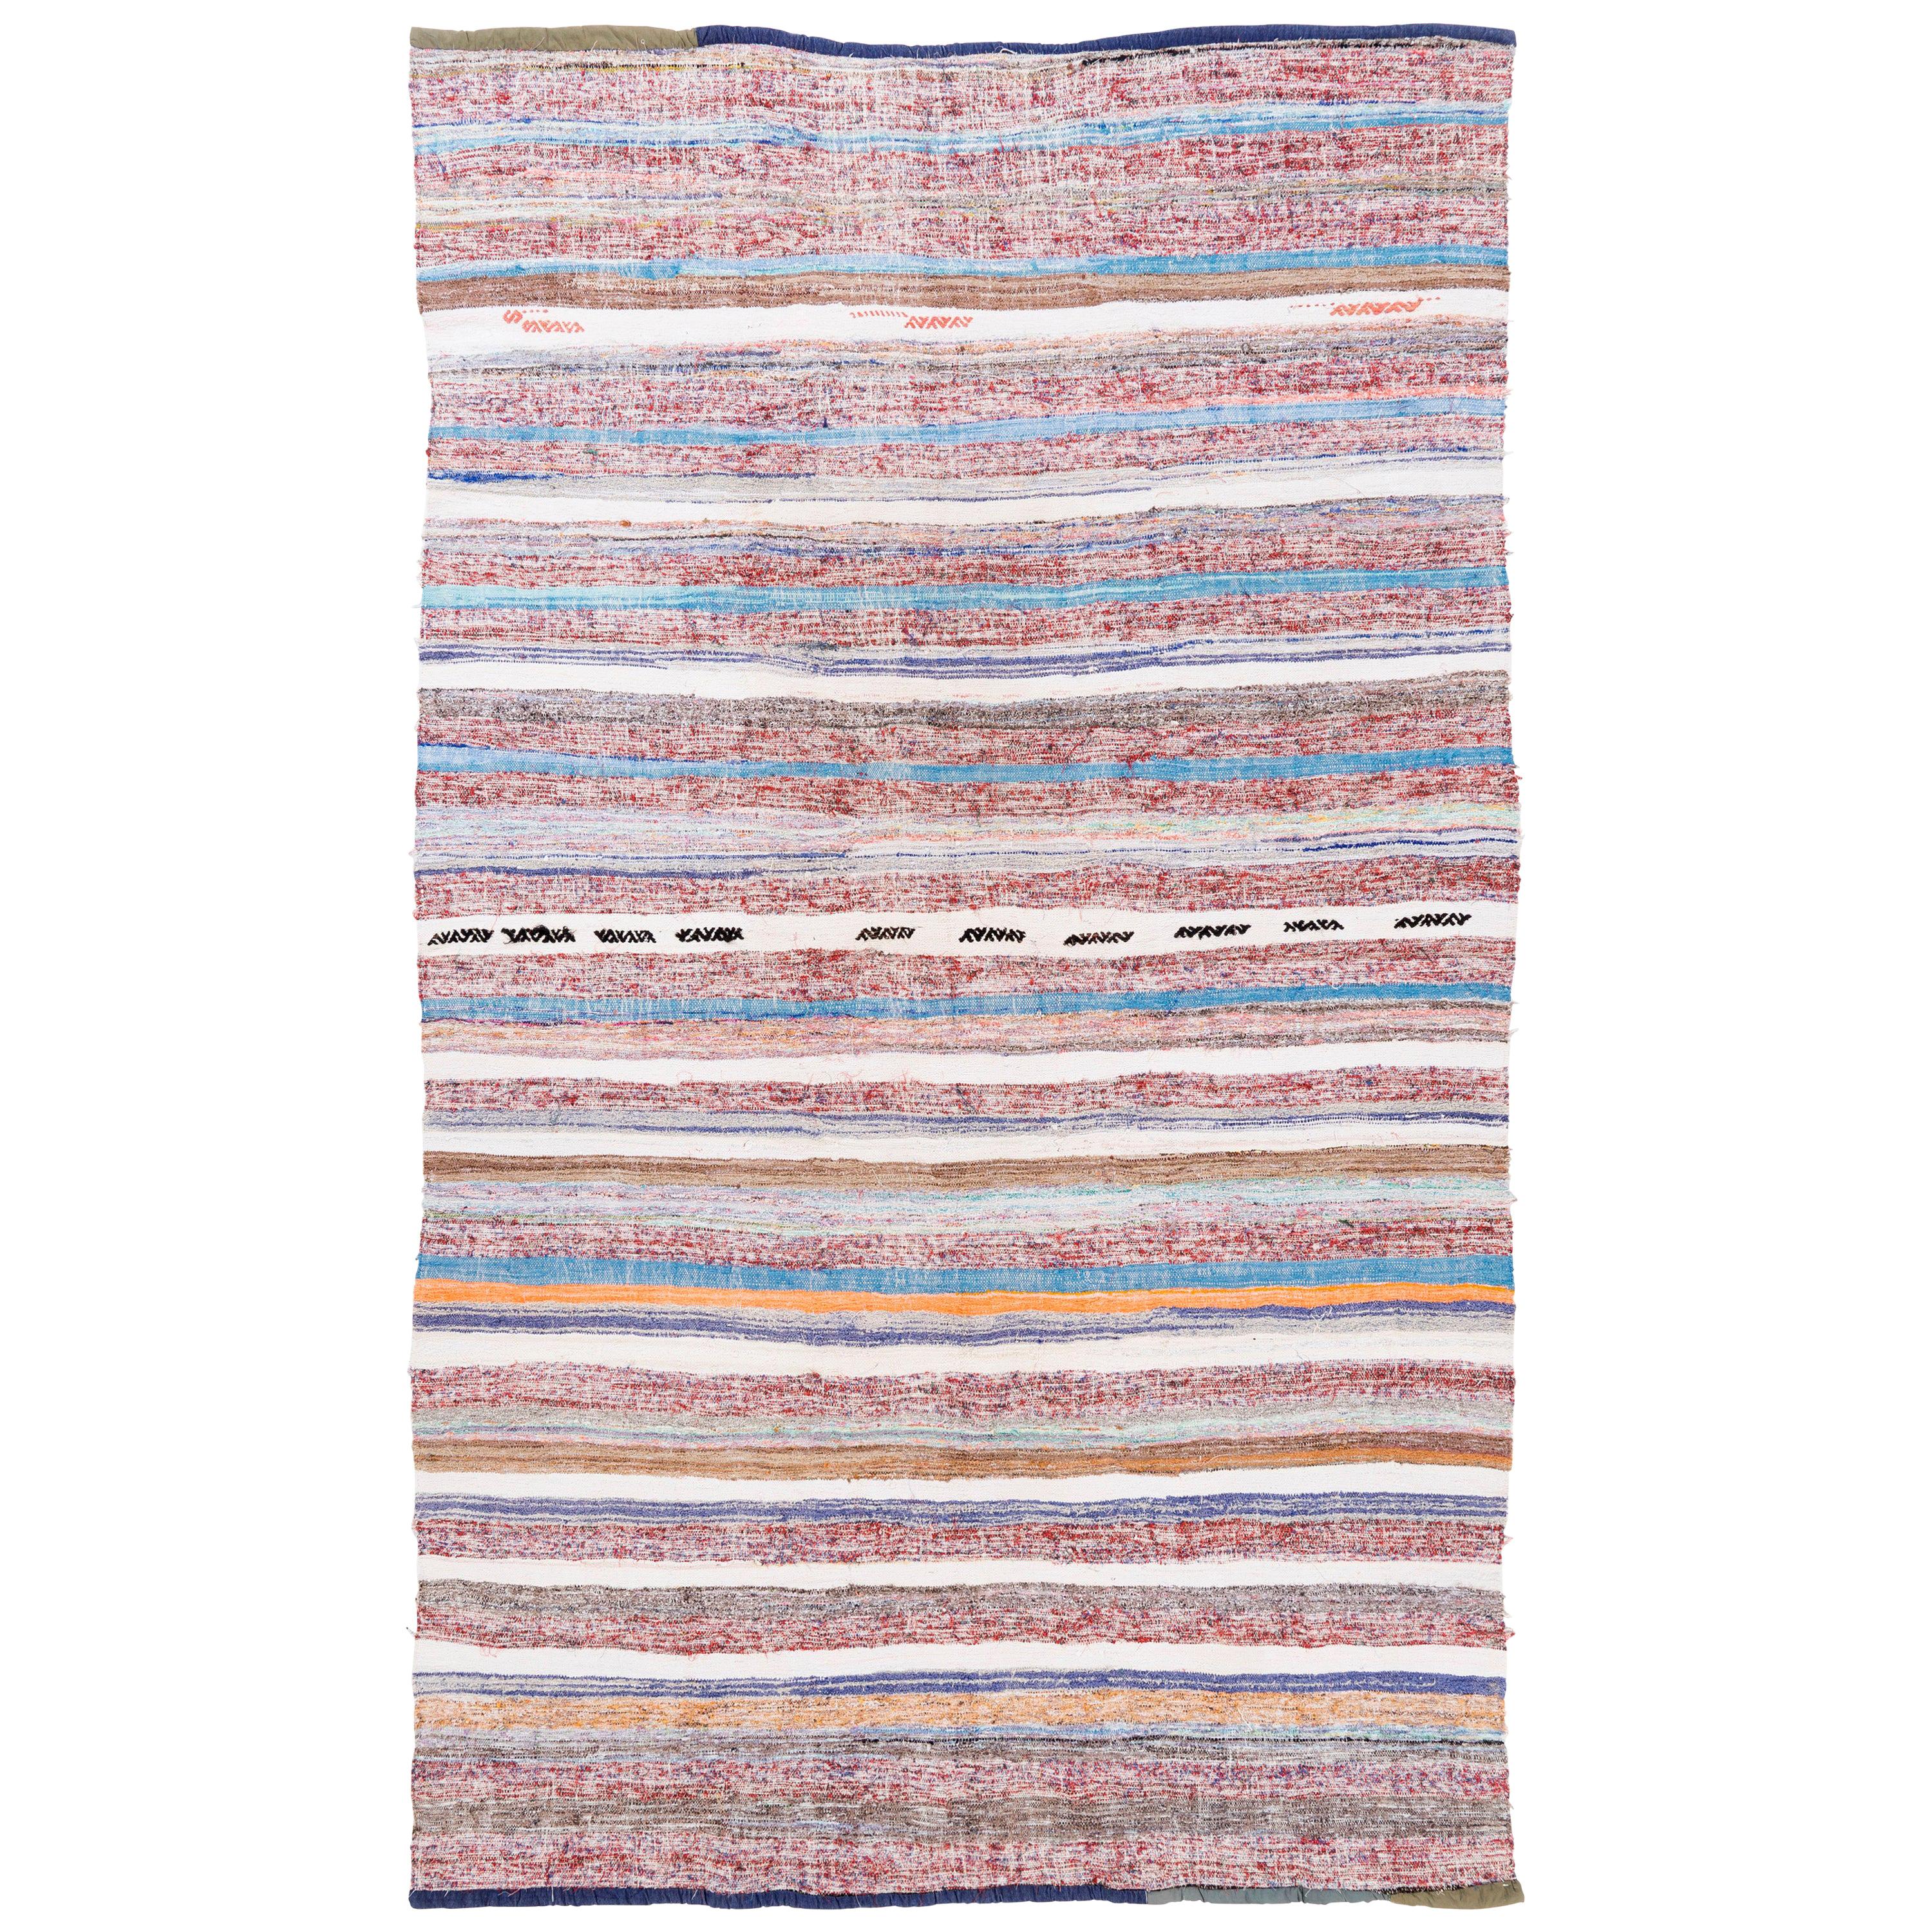 6.6x11 Ft Mid-century Handwoven Banded Kilim Rug, Flat-Woven Cotton Carpet